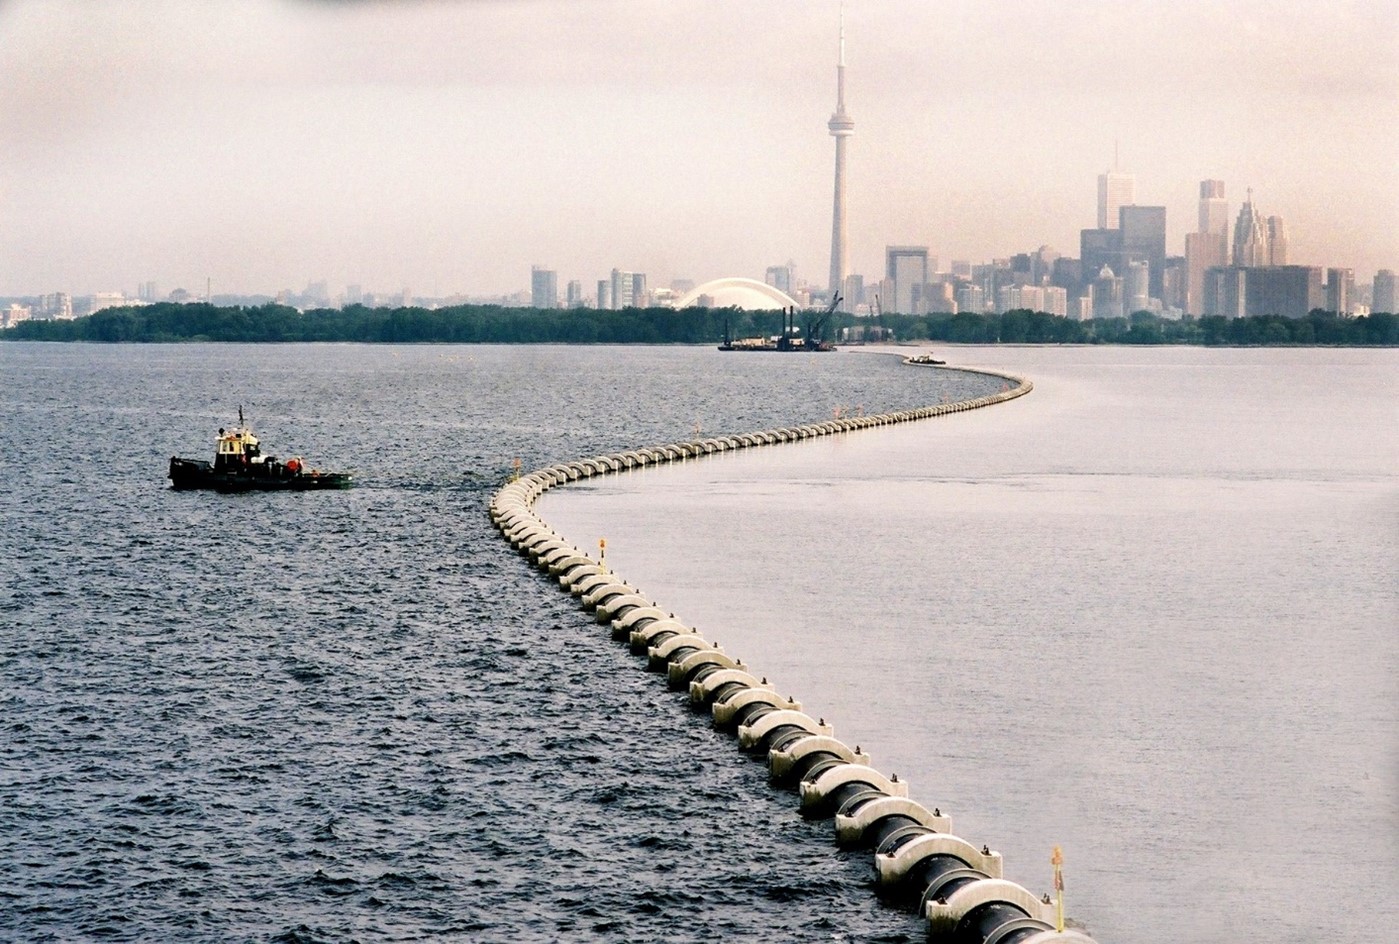 Toronto is home to the world’s largest lake-powered cooling system